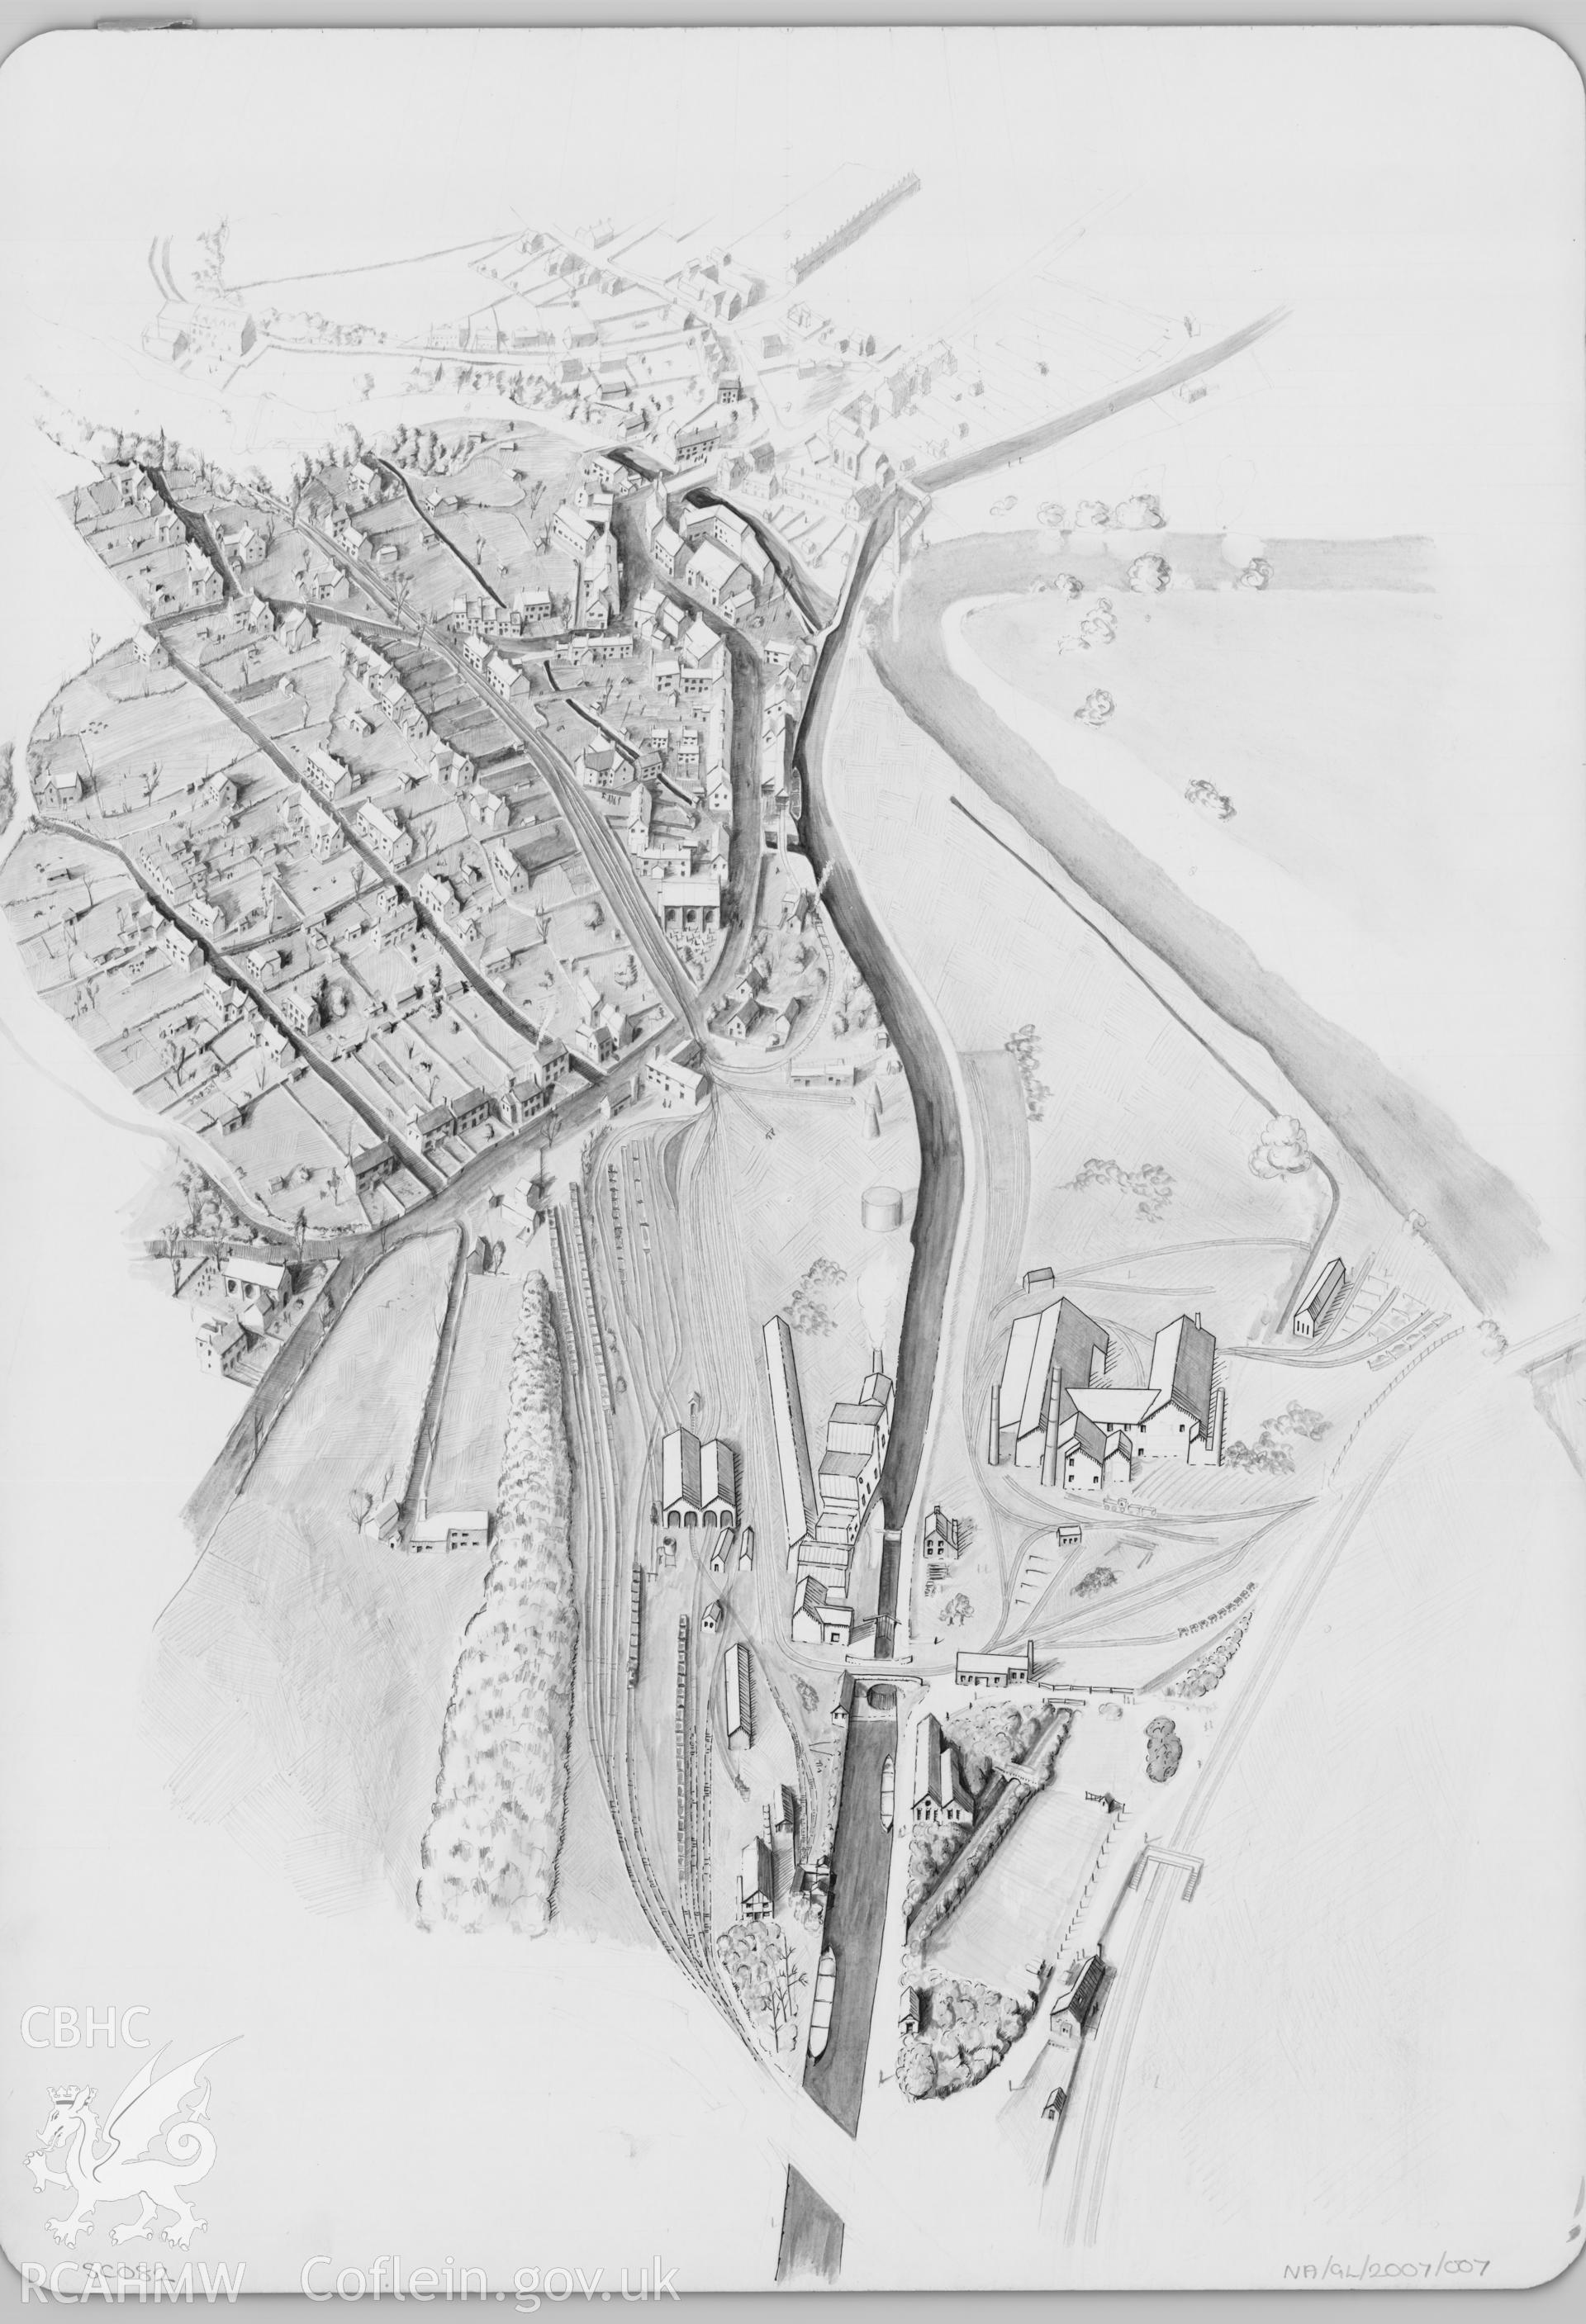 Birds-eye reconstruction drawing showing Clydach Foundry and surrounding area as it would have appeared around 1880, produced by J.D. Goodband, 1979.